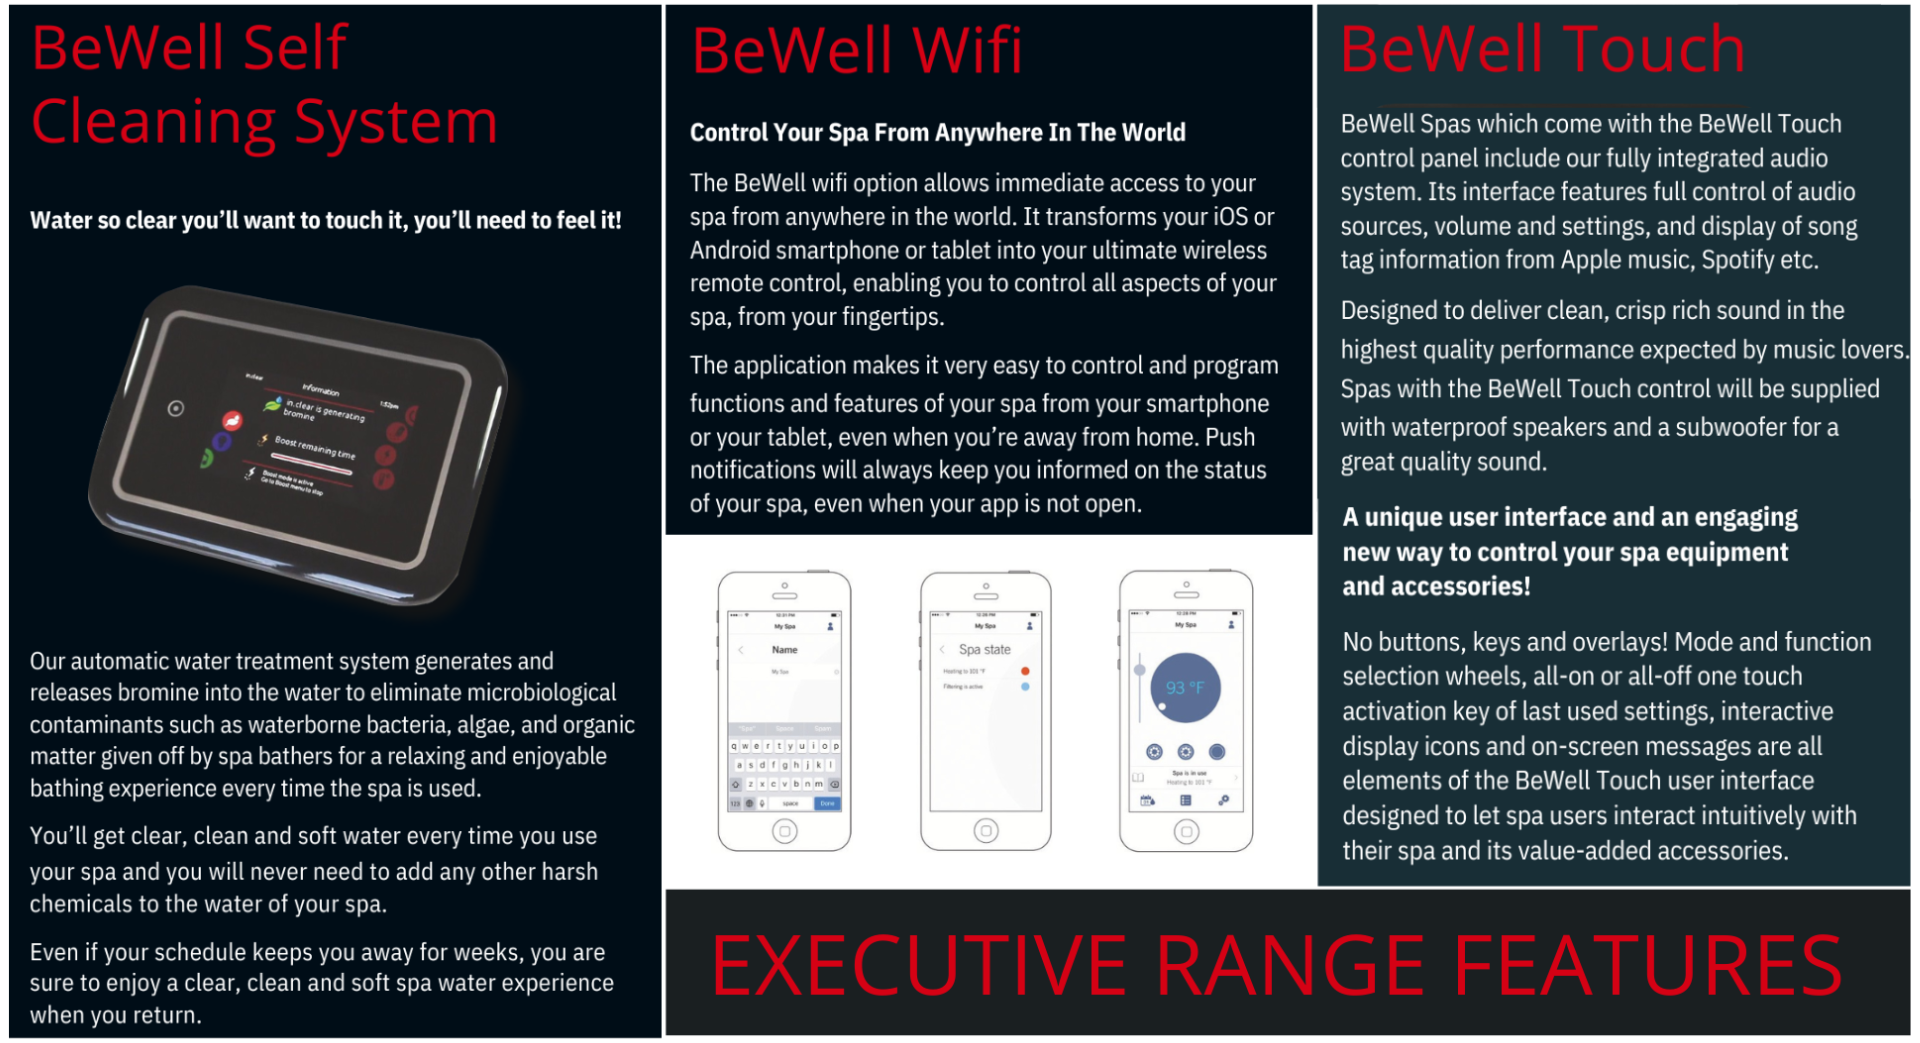 BeWell Executive Features | A6 Hot Tubs